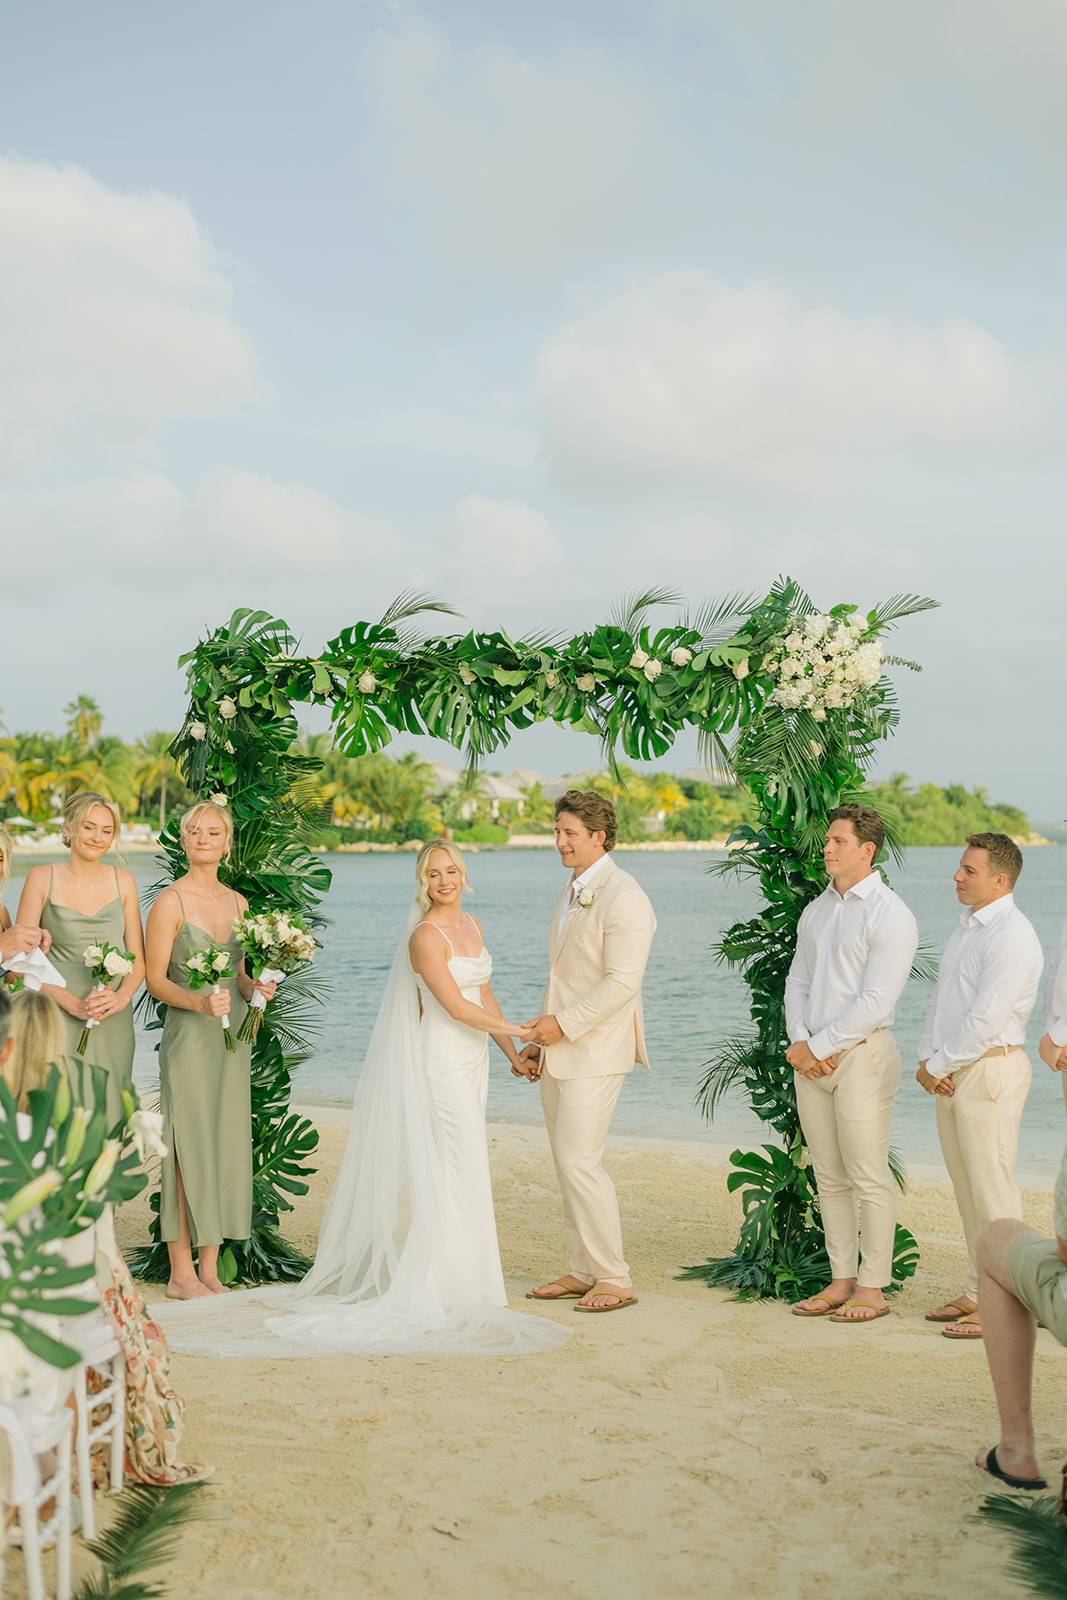 Beautiful wedding bouquet photography by Antigua's top photographer
